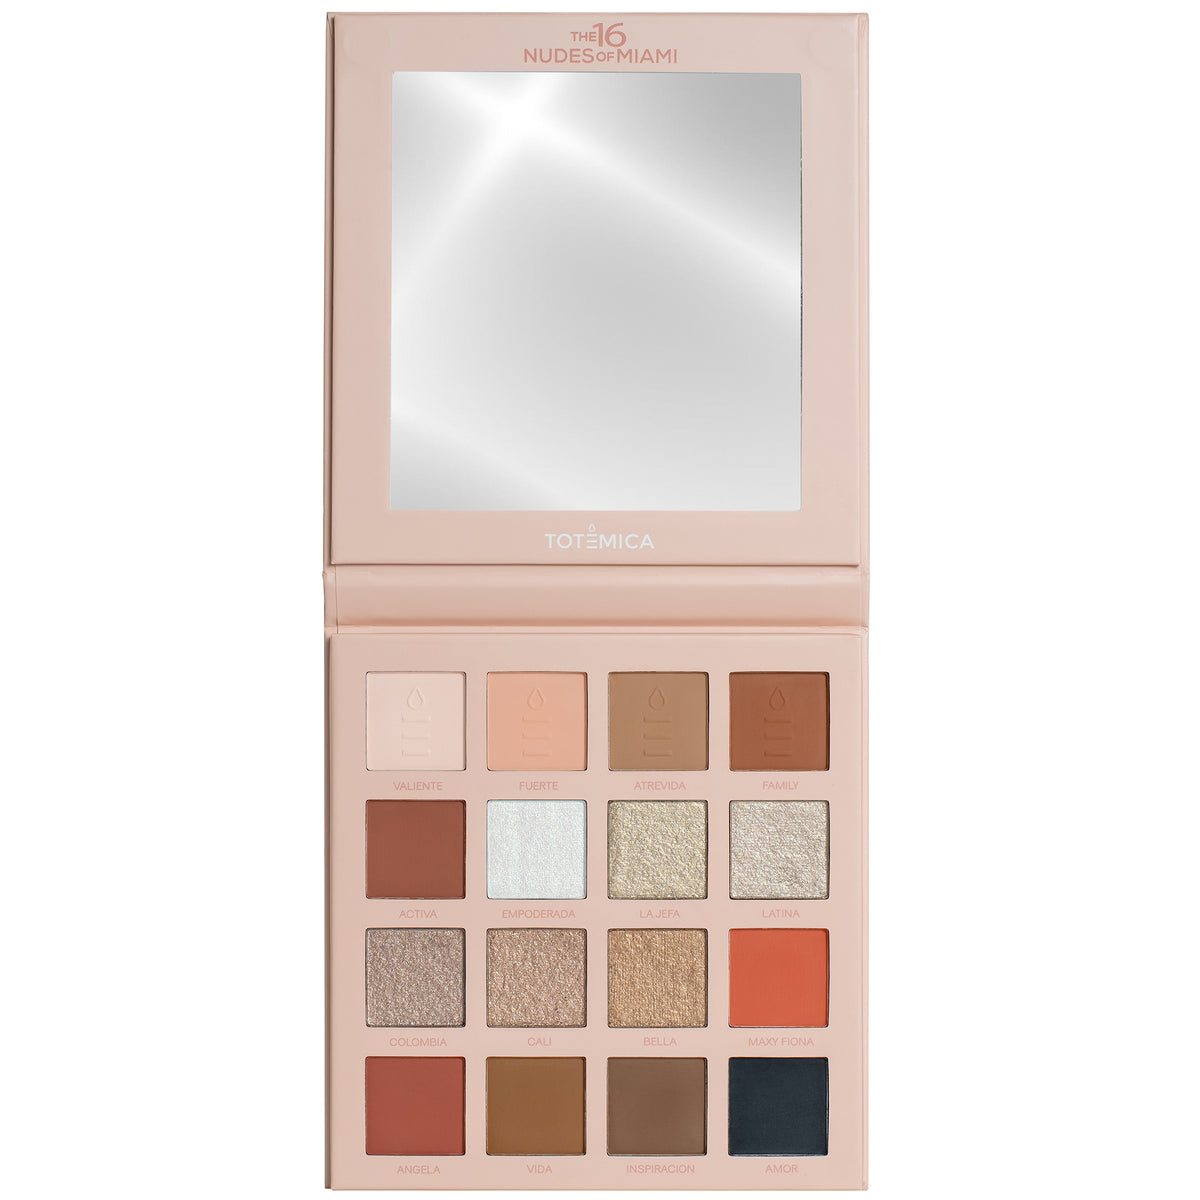 The 16 Nudes Of Wholesale | Palette Totemica Makeup Miami 